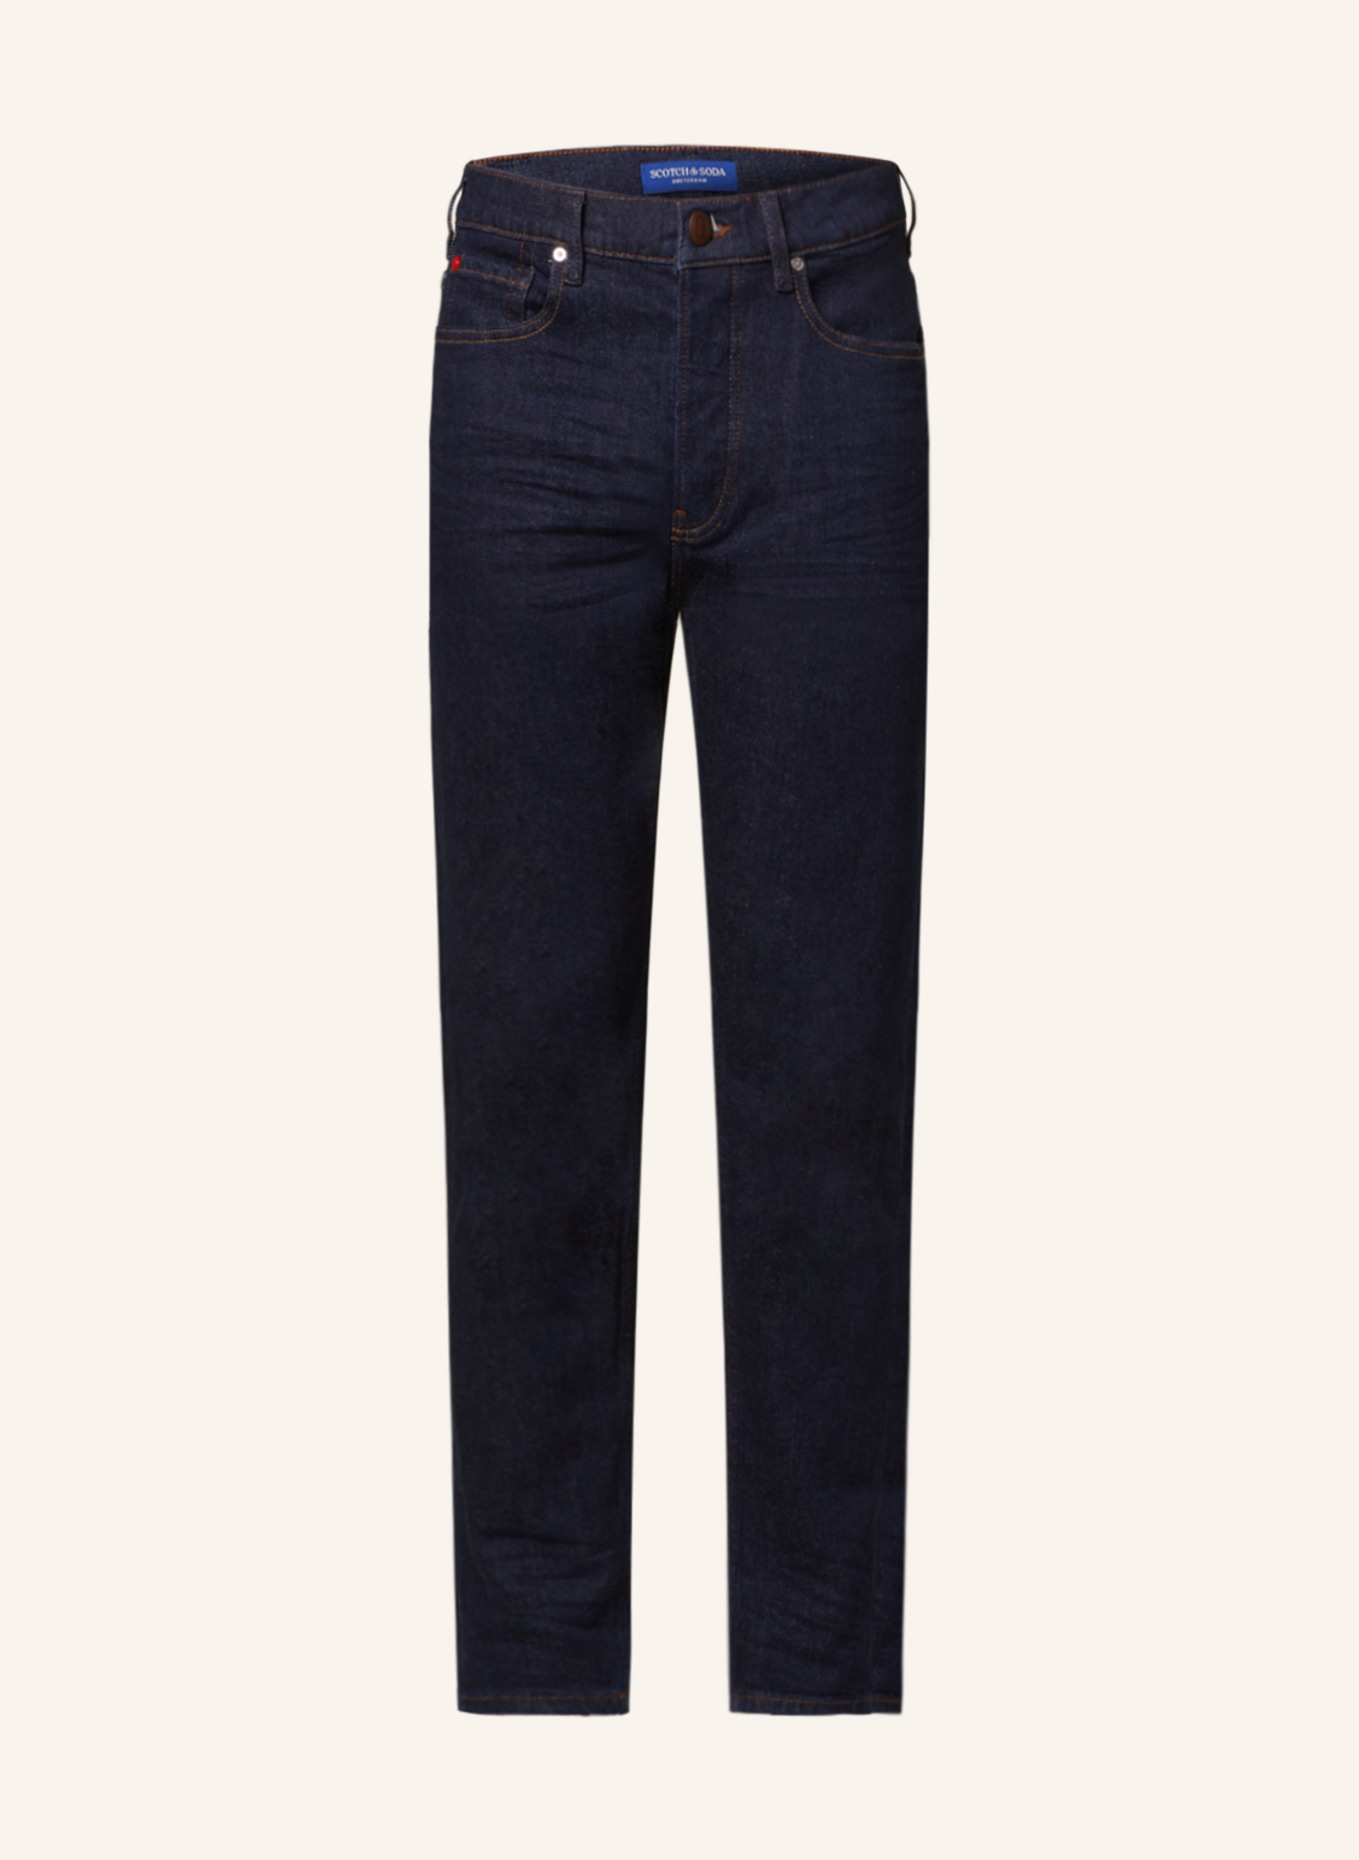 SCOTCH & SODA Jeans THE DROP regular tapered fit, Color: 3634 Deep Ink (Image 1)